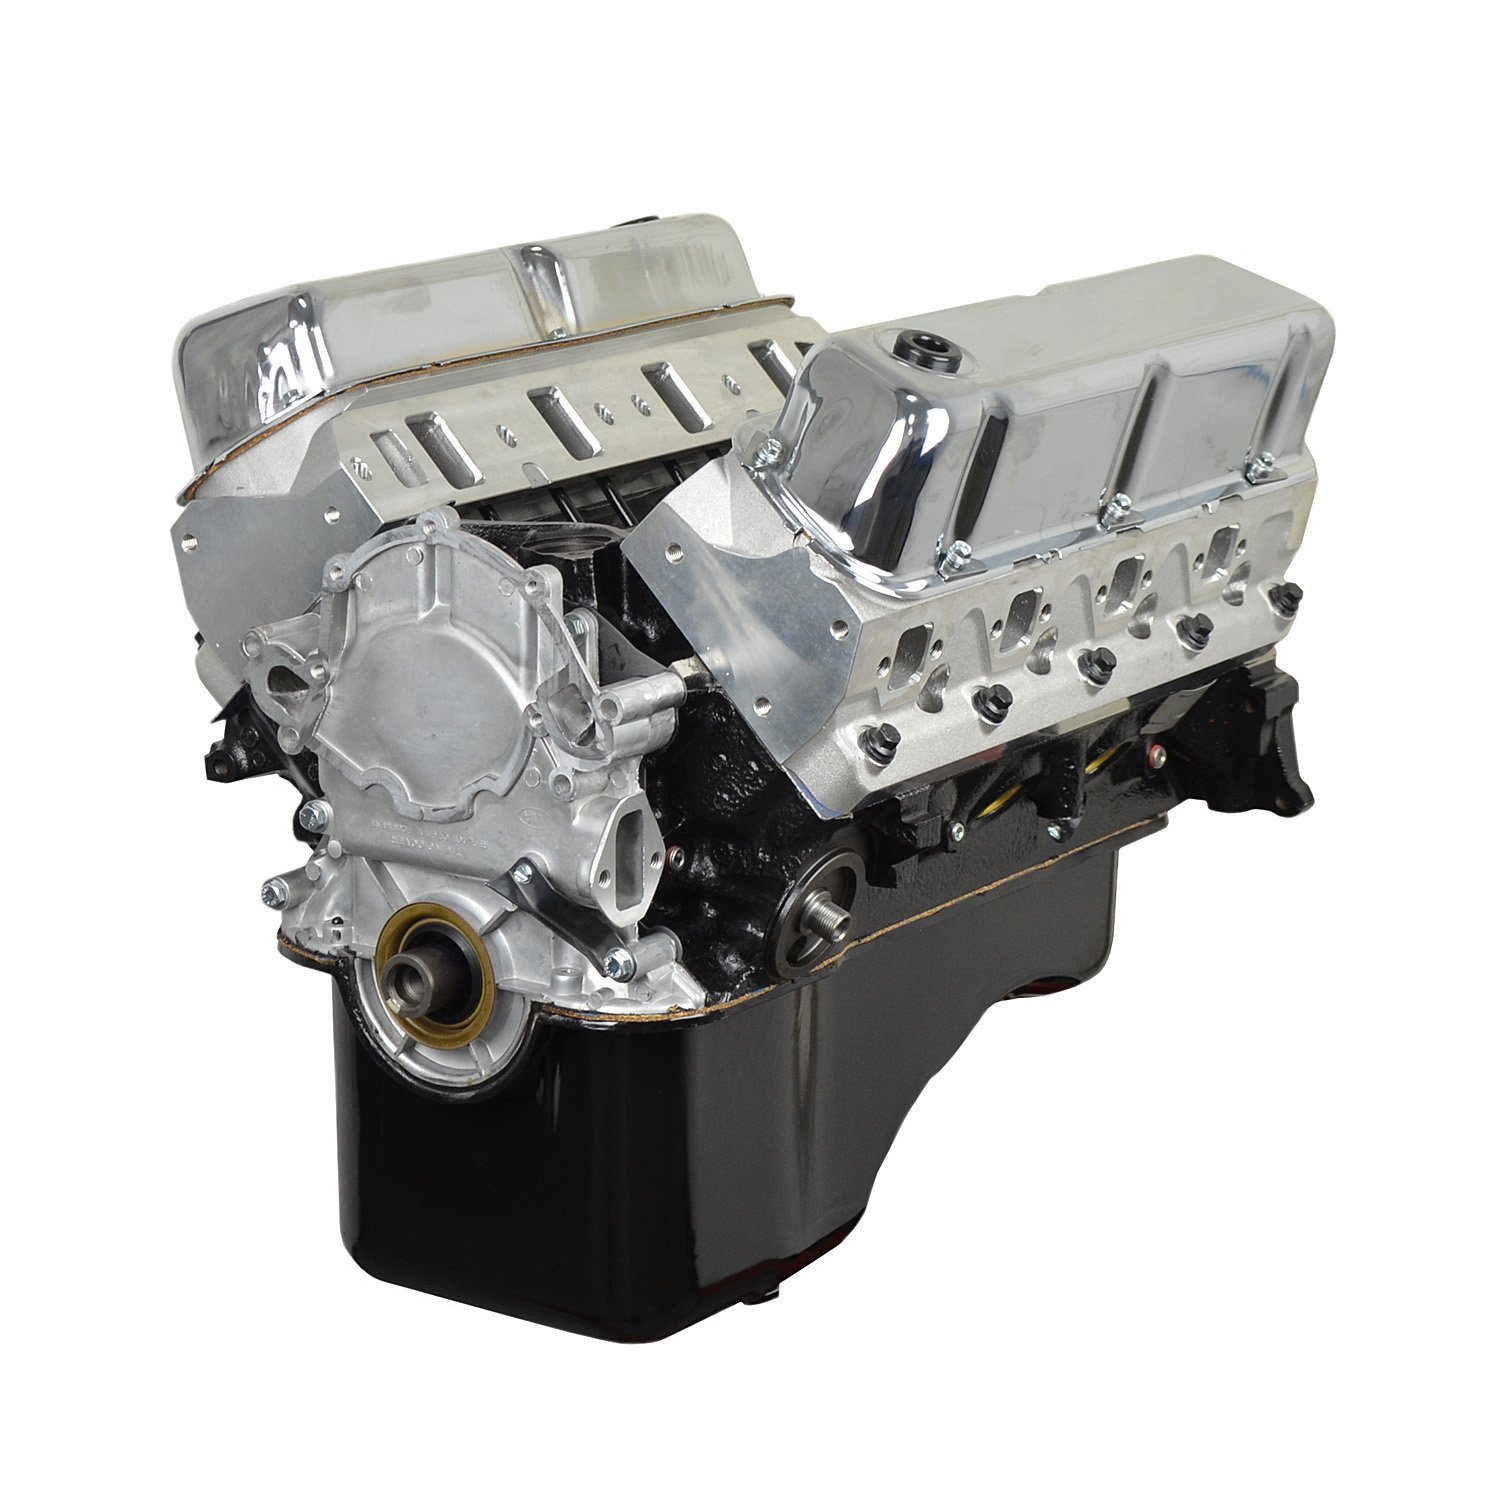 HP100 High Performance Crate Engine Small Block Ford 347ci / 450HP / 440TQ